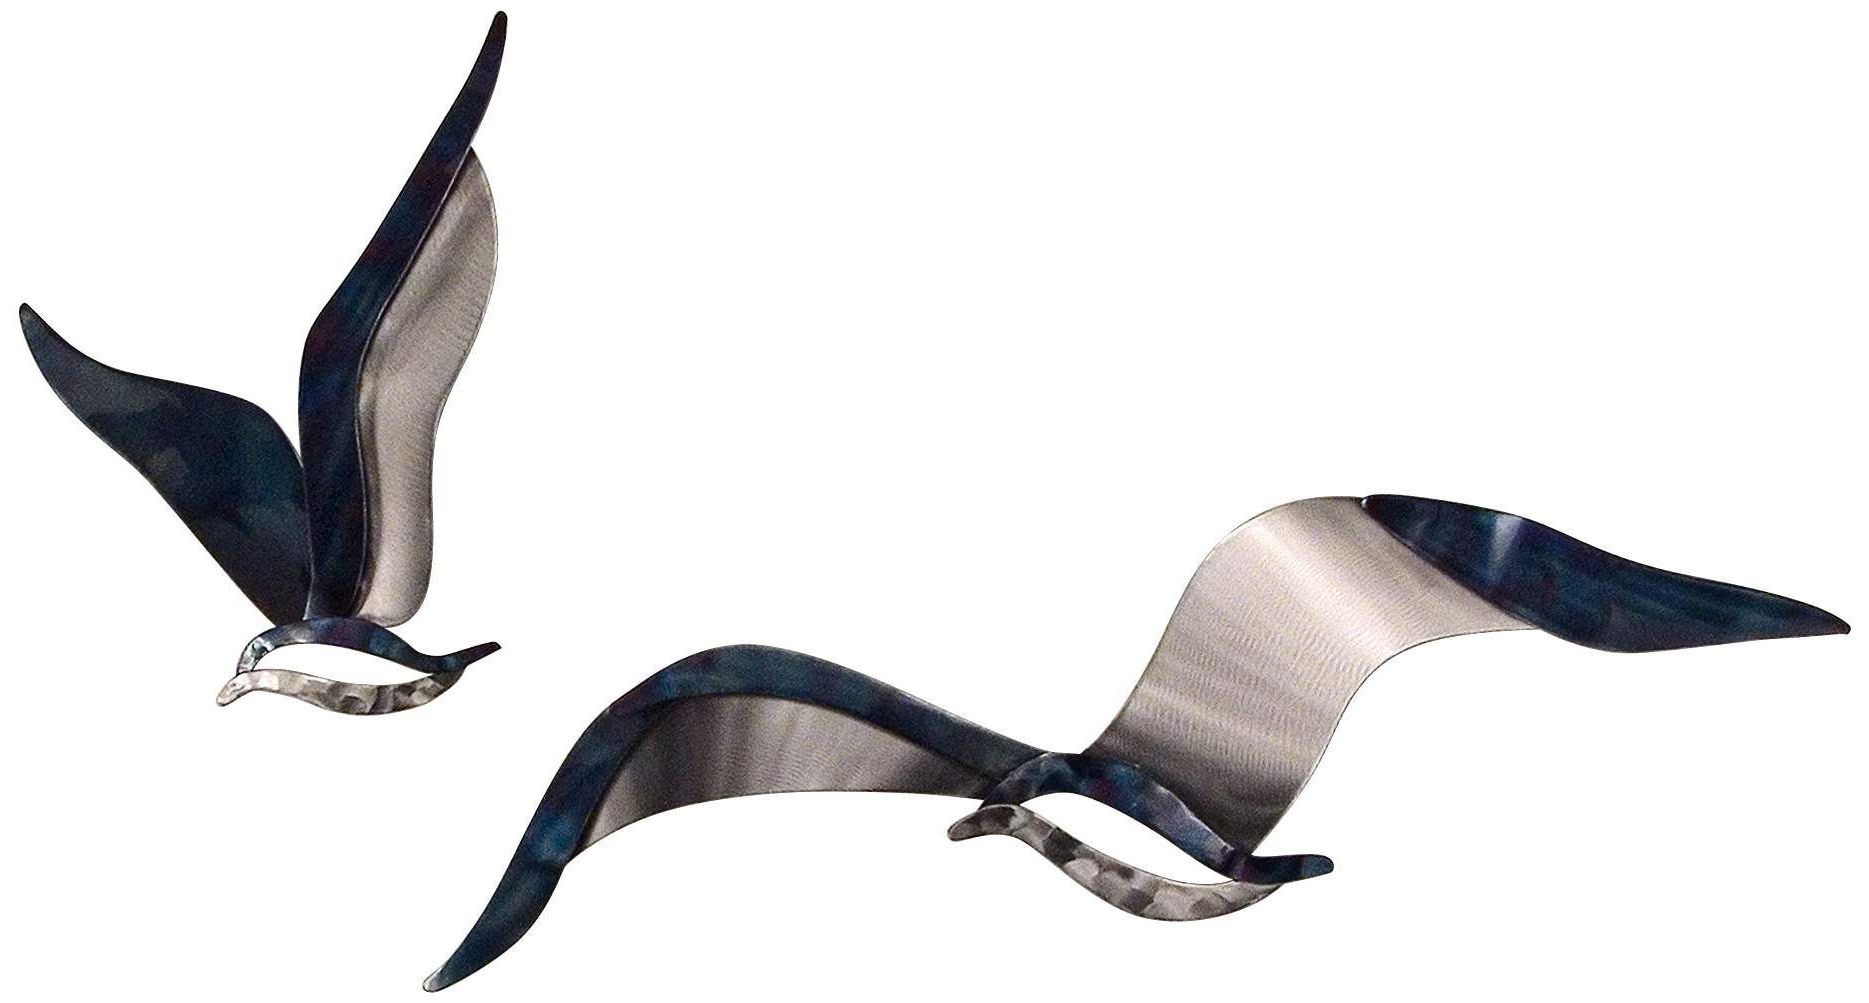 Preferred Seagulls Metal Wall Art For Seagulls 2 Piece 24 Inch High Metal Wall Art In  (View 12 of 15)